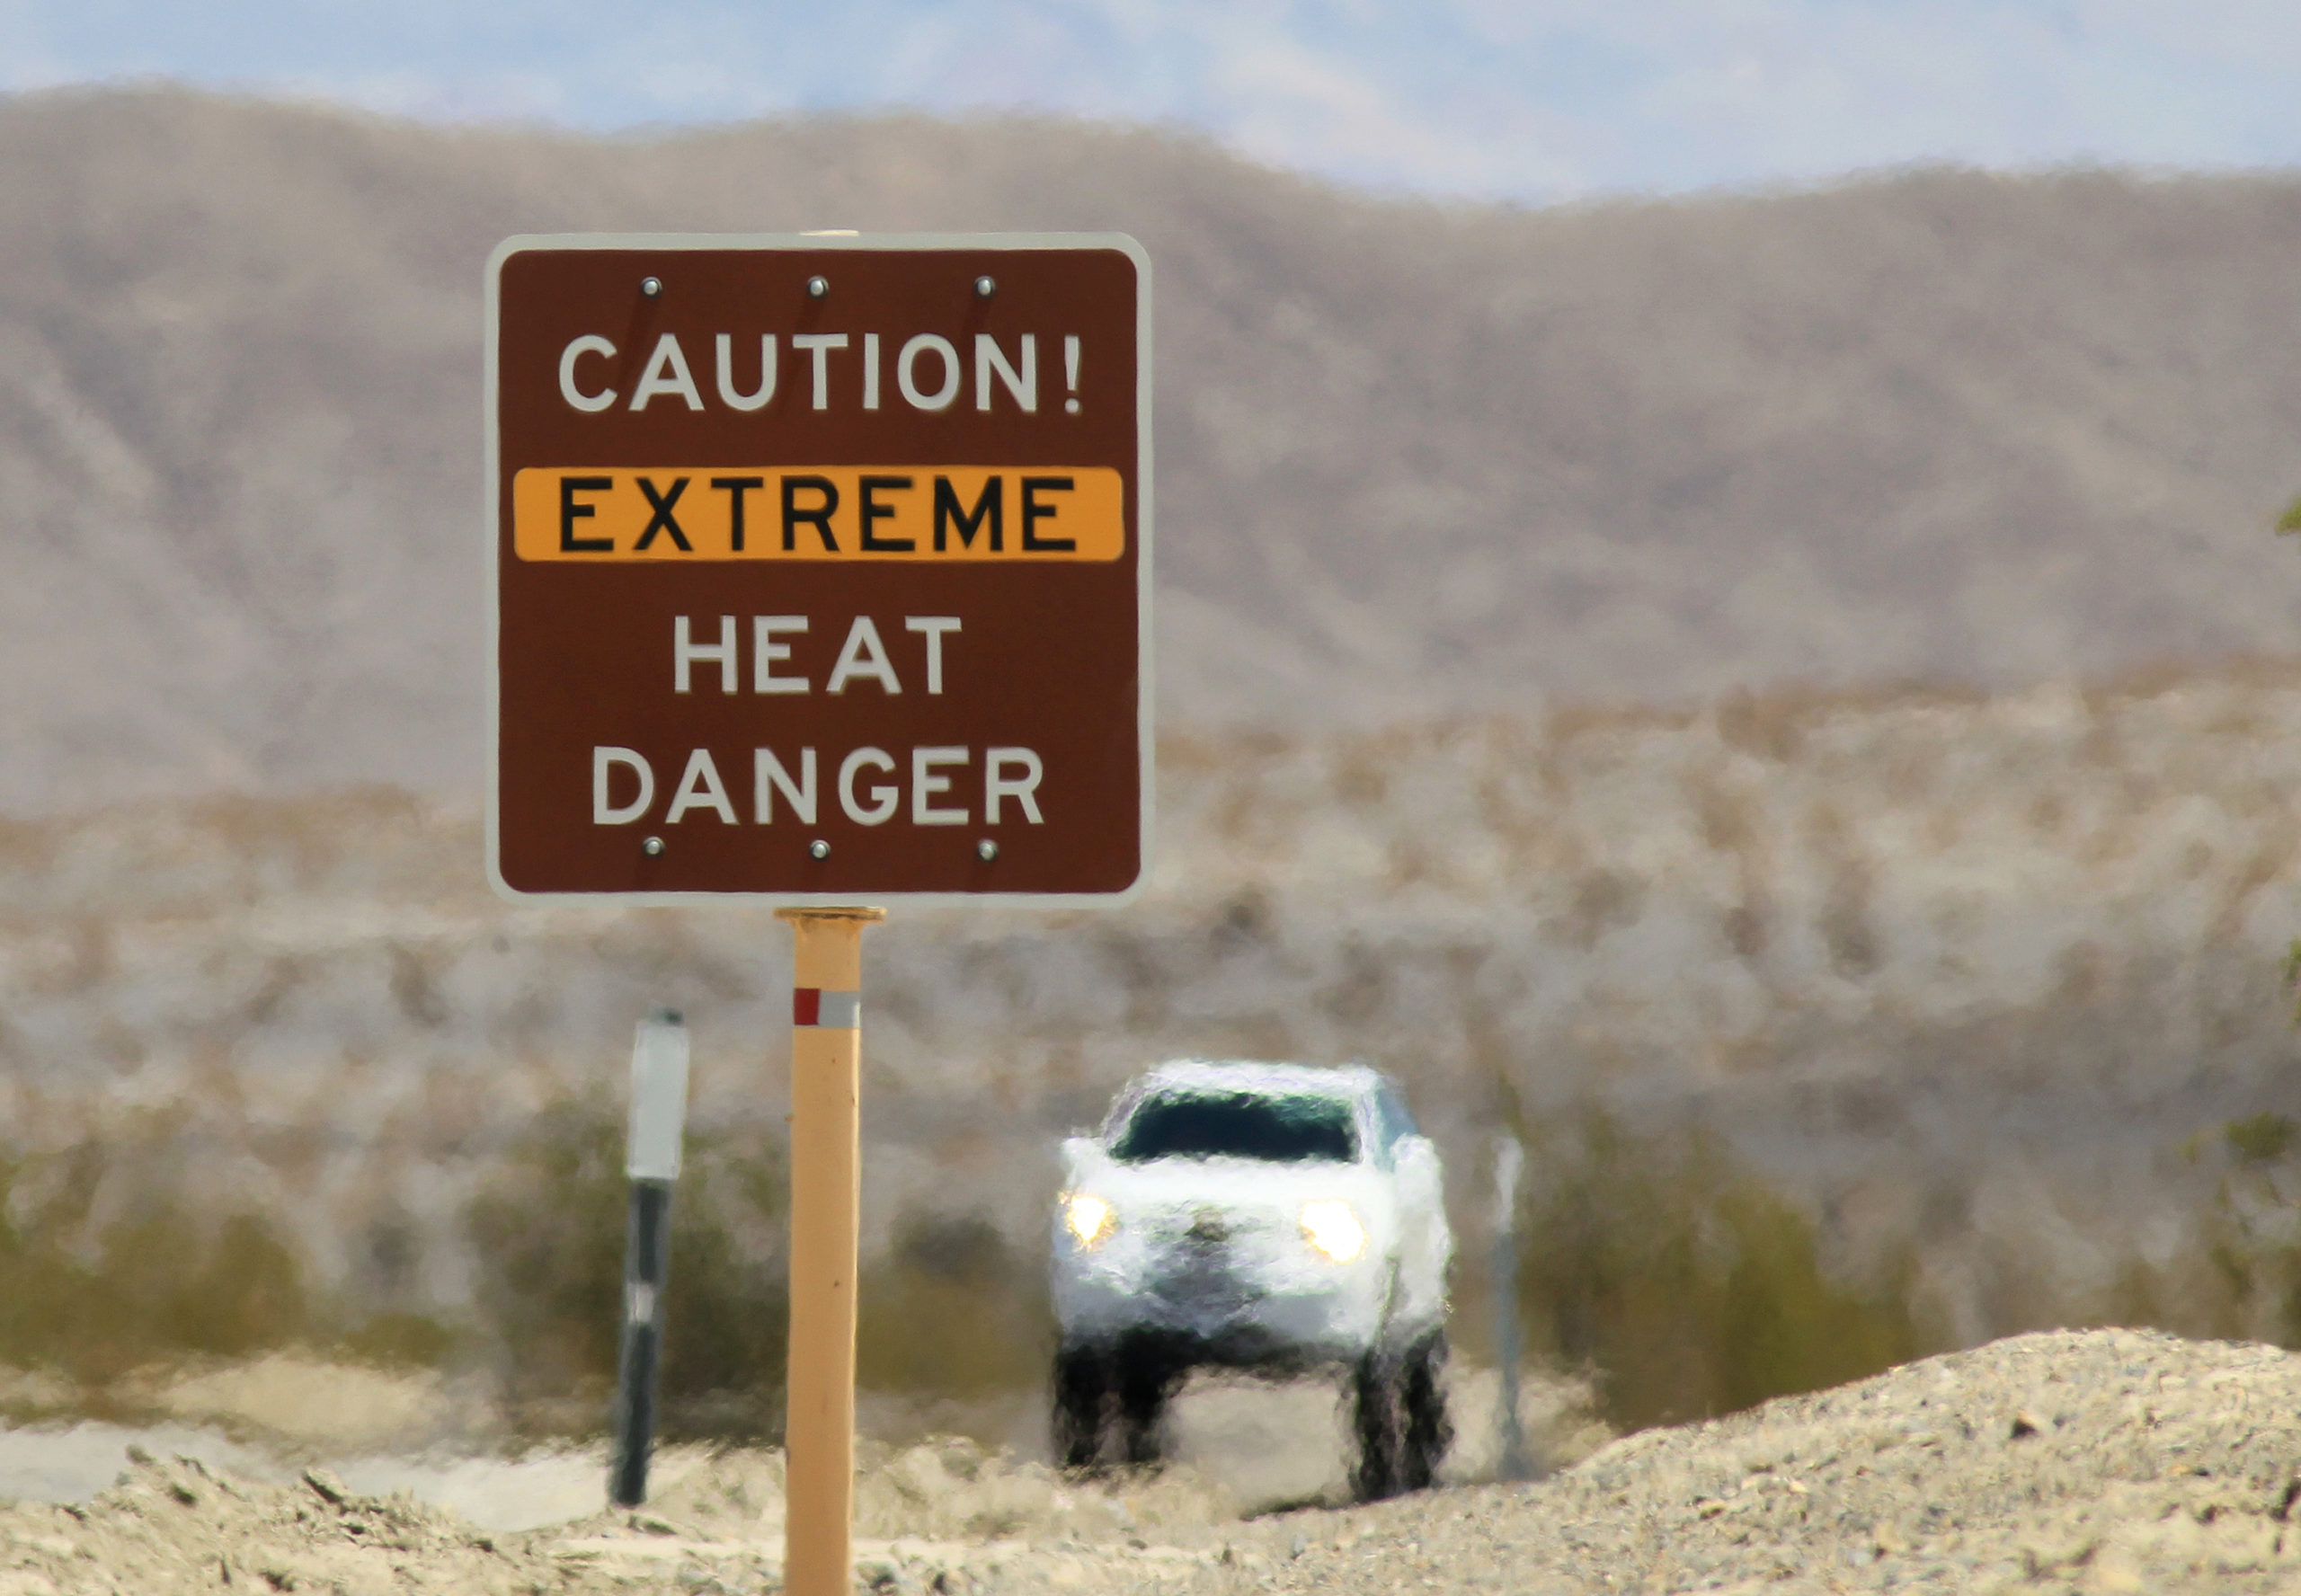 DEATH VALLEY NATIONAL PARK, CA JULY 14: Heat waves rise near a heat danger warning sign on the eve of the AdventurCORPS Badwater 135 ultra-marathon race on July 14, 2013 in Death Valley National Park, California. Billed as the toughest footrace in the world, the 36th annual Badwater 135 starts at Badwater Basin in Death Valley, 280 feet below sea level, where athletes begin a 135-mile non-stop run over three mountain ranges in extreme mid-summer desert heat to finish at 8,350-foot near Mount Whitney for a total cumulative vertical ascent of 13,000 feet. July 10 marked the 100-year anniversary of the all-time hottest world record temperature of 134 degrees, set in Death Valley where the average high in July is 116. A total of 96 competitors from 22 nations are attempting the run which equals about five back-to-back marathons. Previous winners have completed all 135 miles in slightly less than 24 hours. (Photo by David McNew/Getty Images)